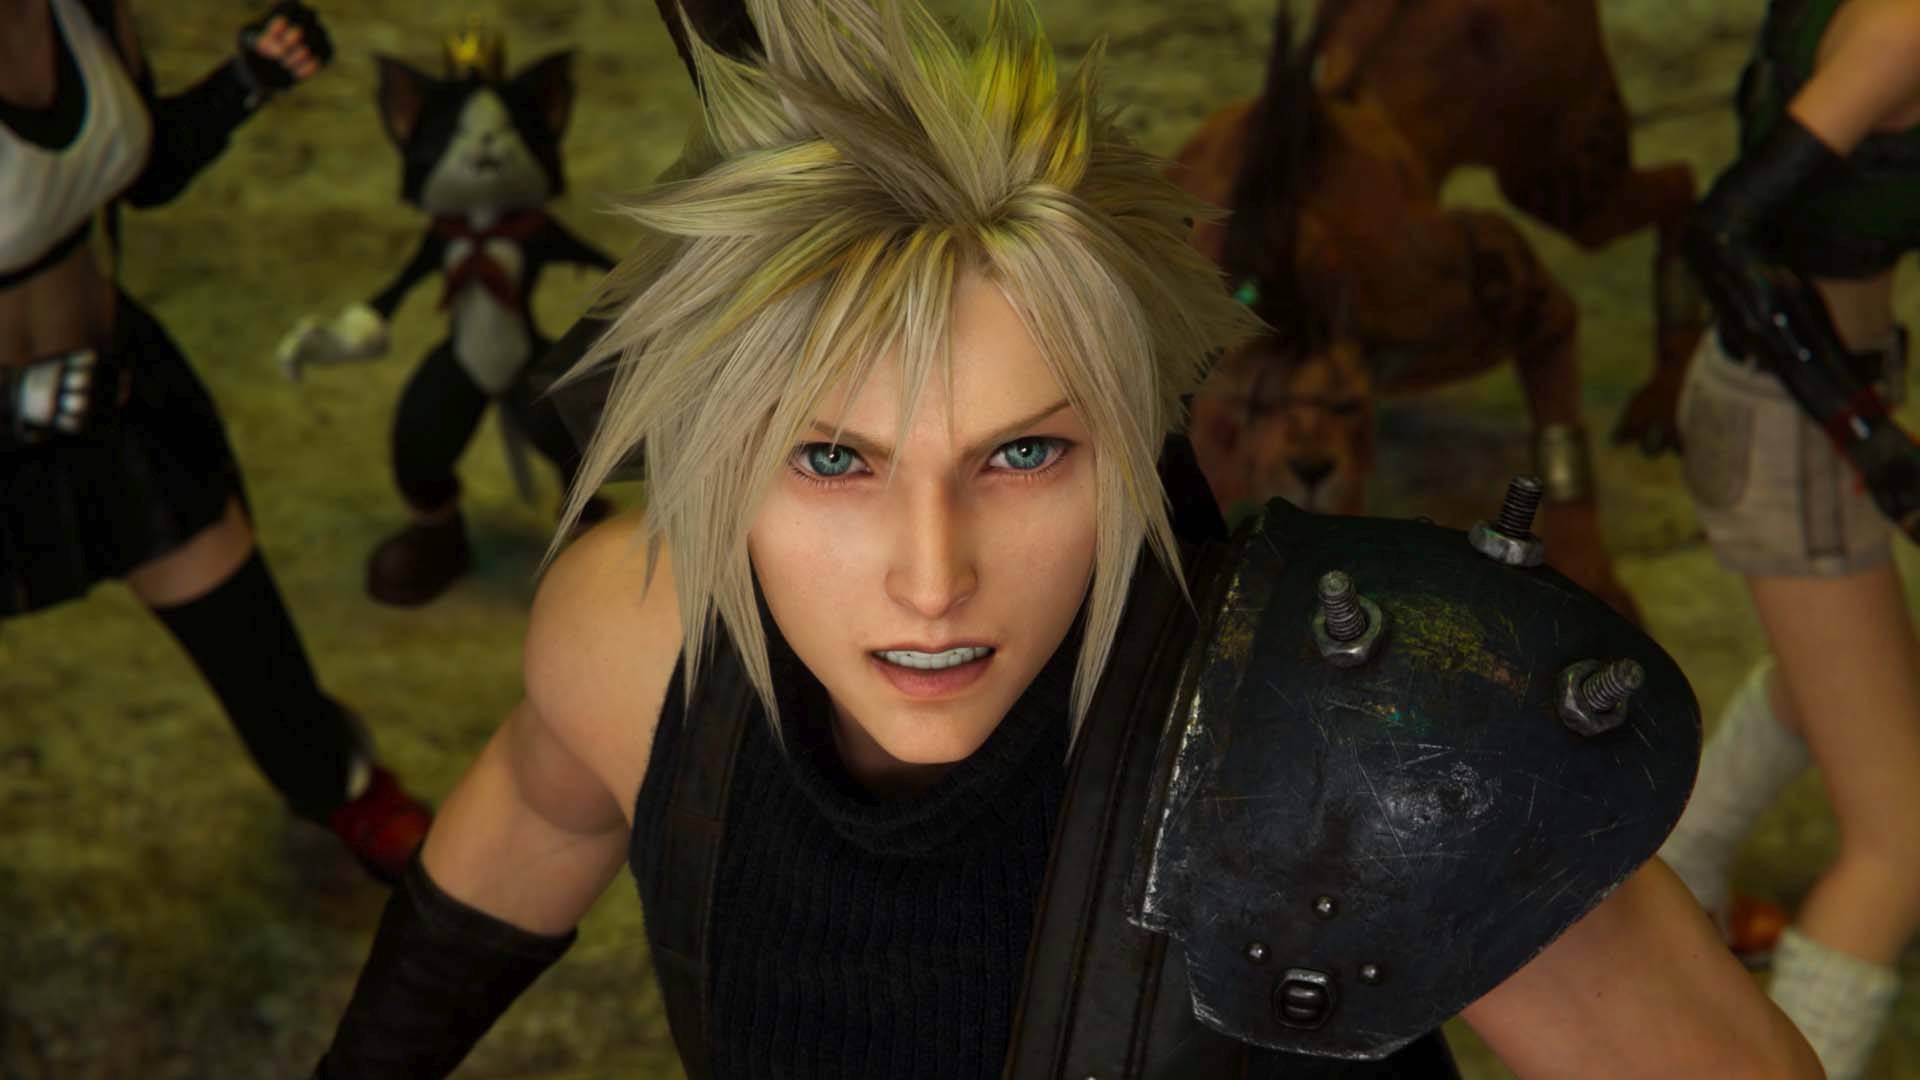 Final Fantasy VII Rebirth Patch 1.020 Available Now, Improving Graphics, Fixing Bugs, and More